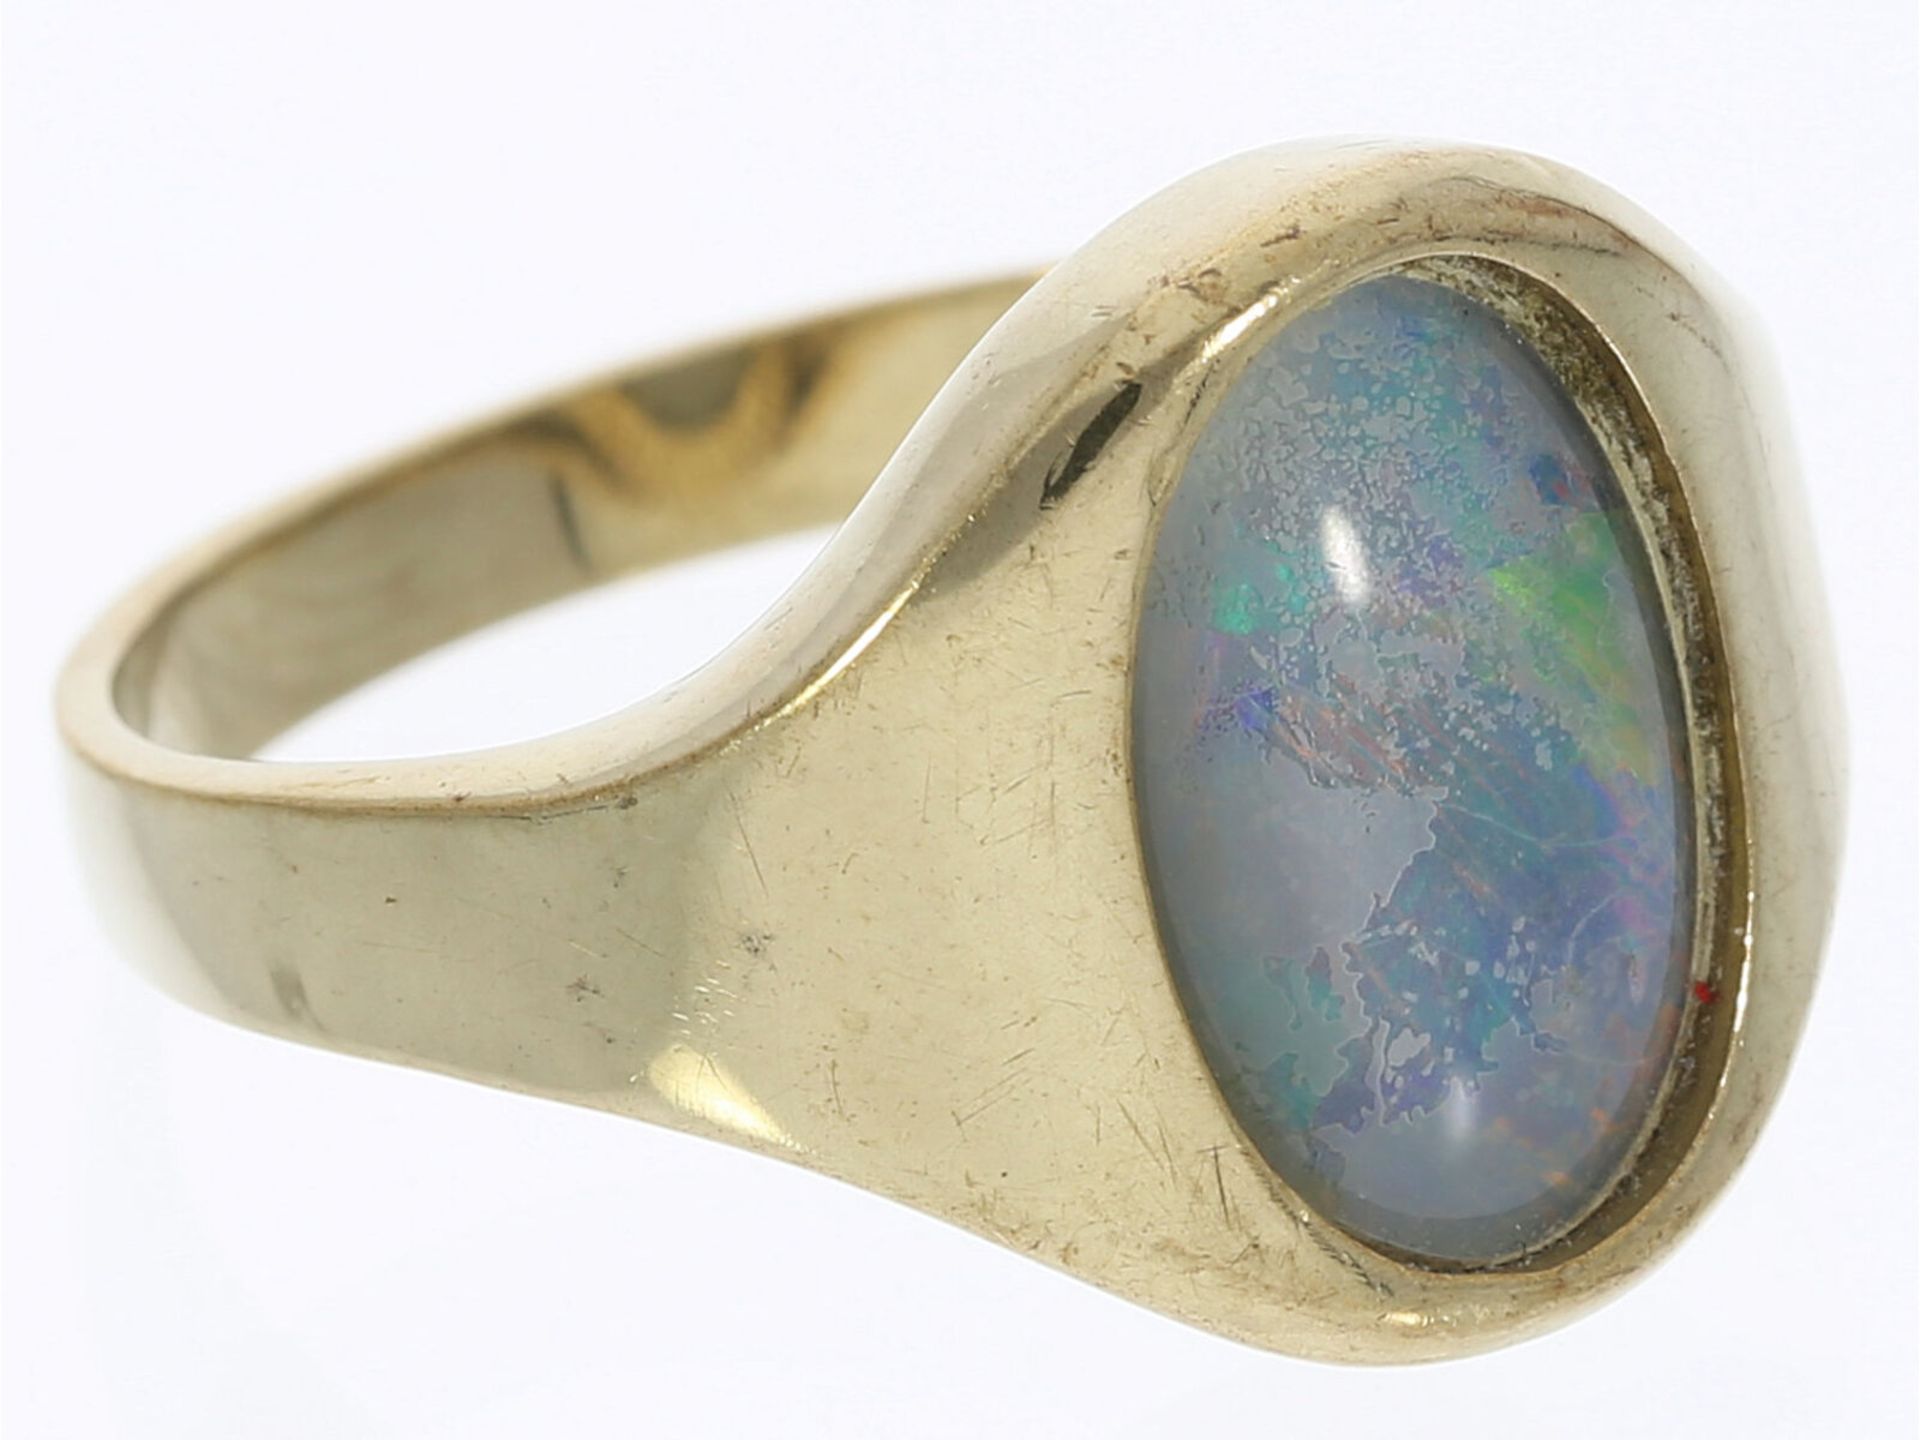 Goldring mit Opal - Image 2 of 2